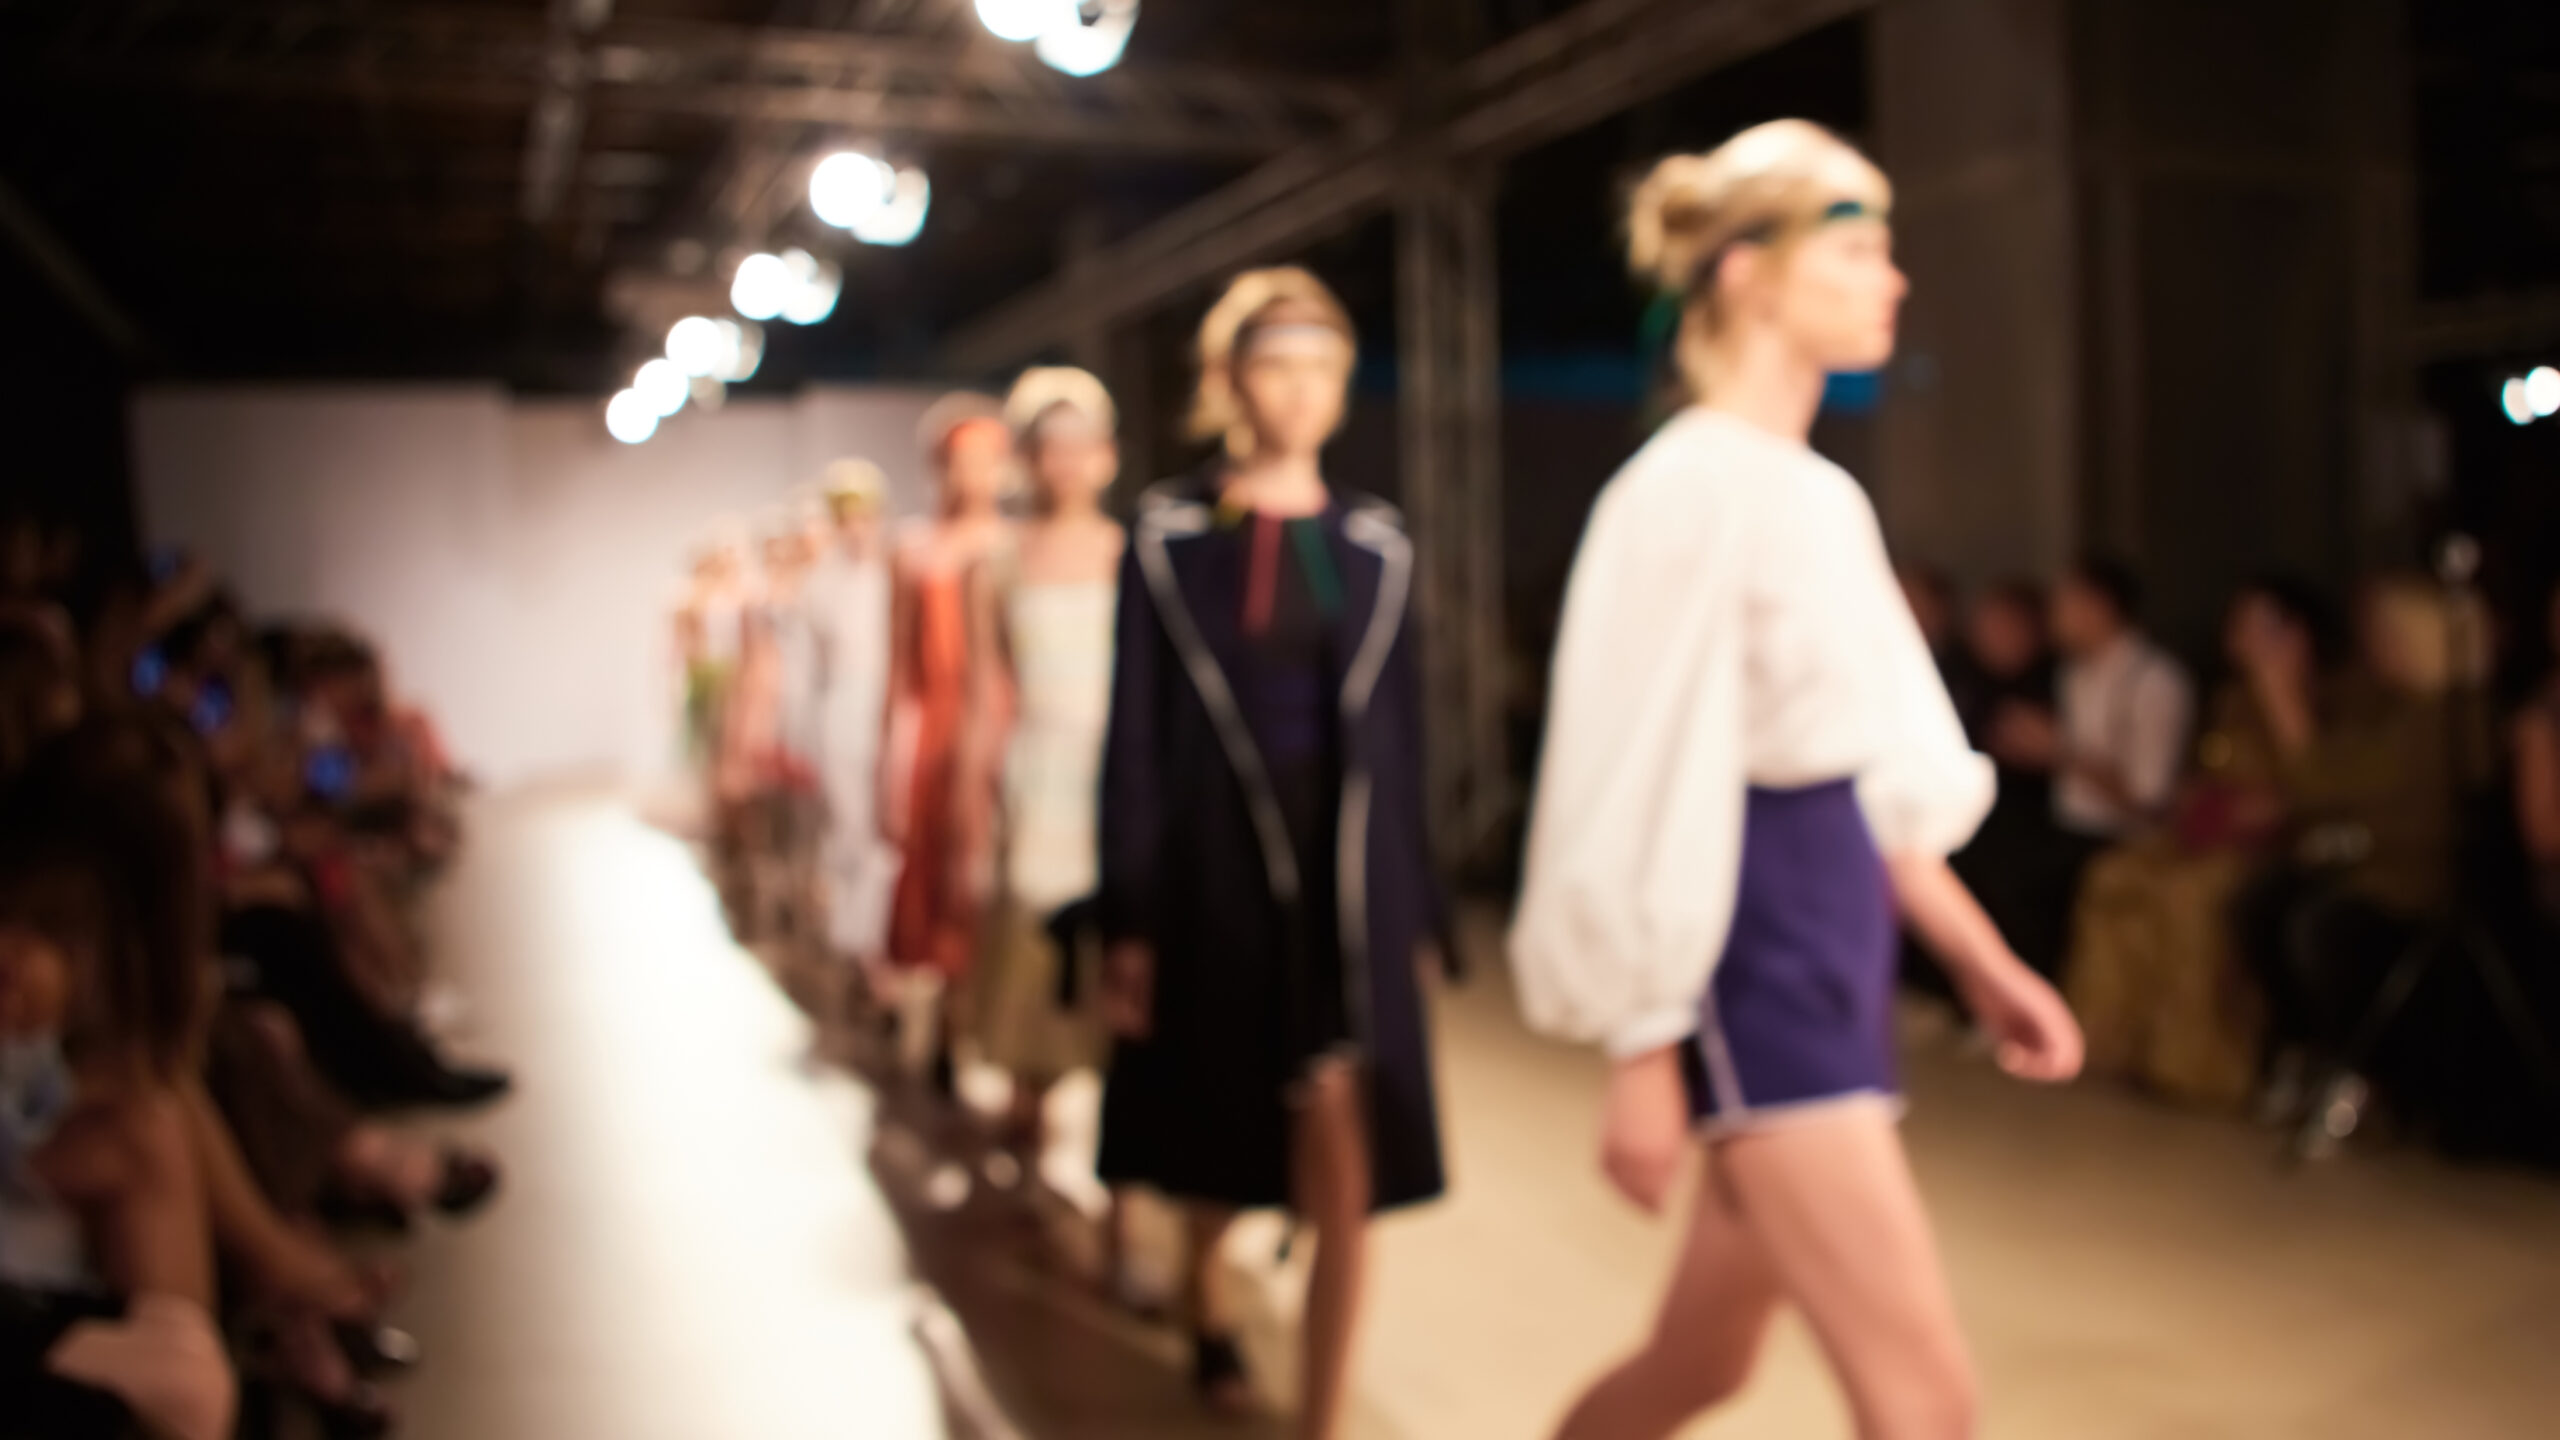 Fashion runway out of focus. The blur background